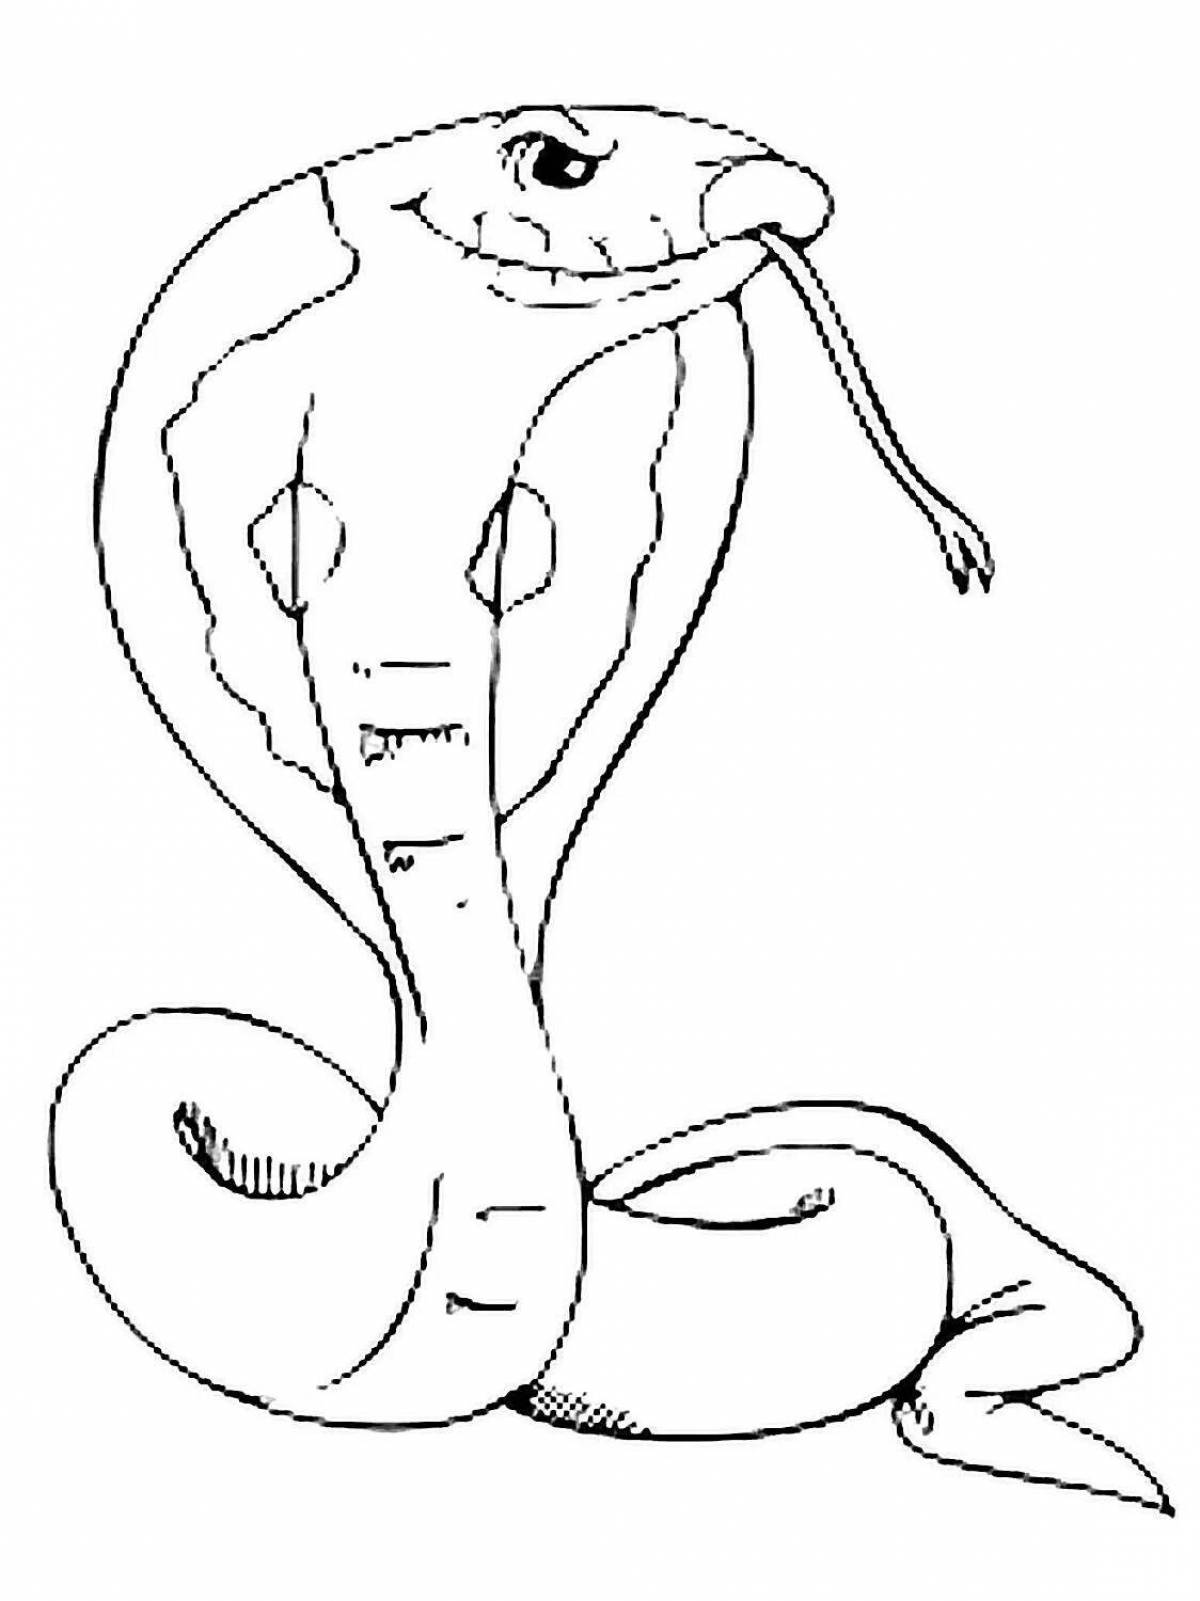 Mongoose coloring page